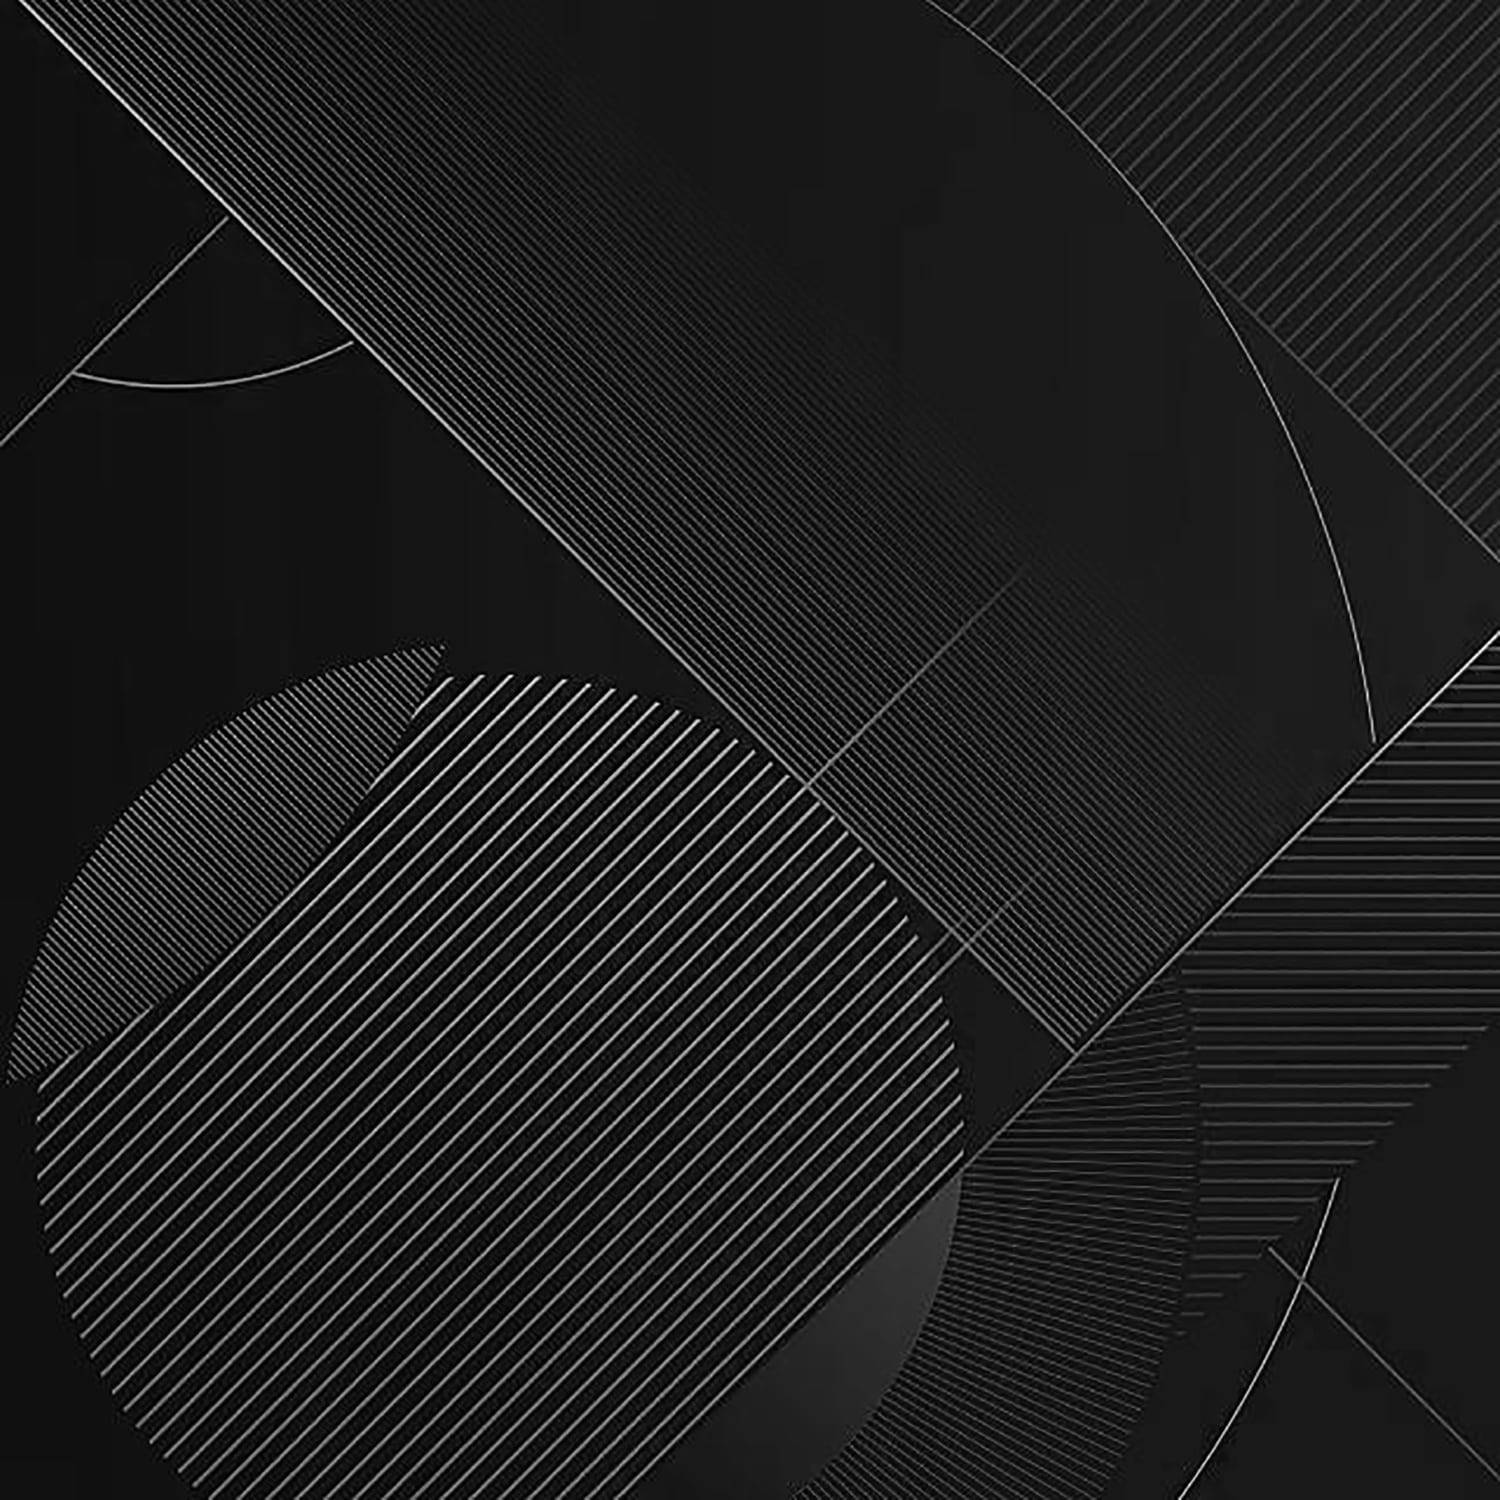 Abstract Striped Line Art Black Pattern Background